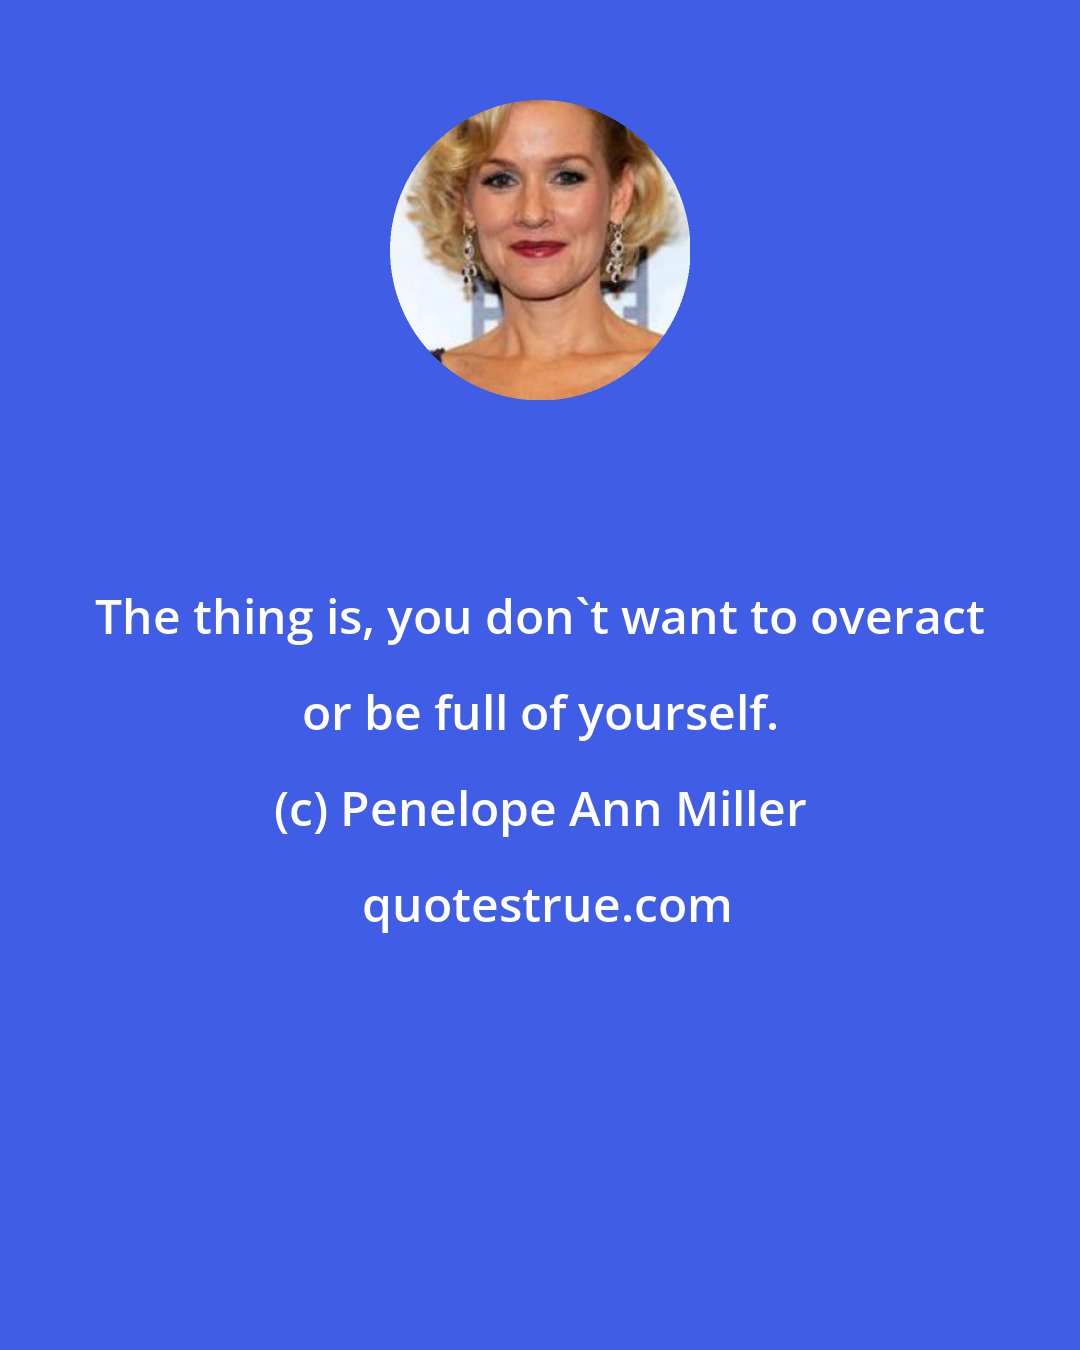 Penelope Ann Miller: The thing is, you don't want to overact or be full of yourself.